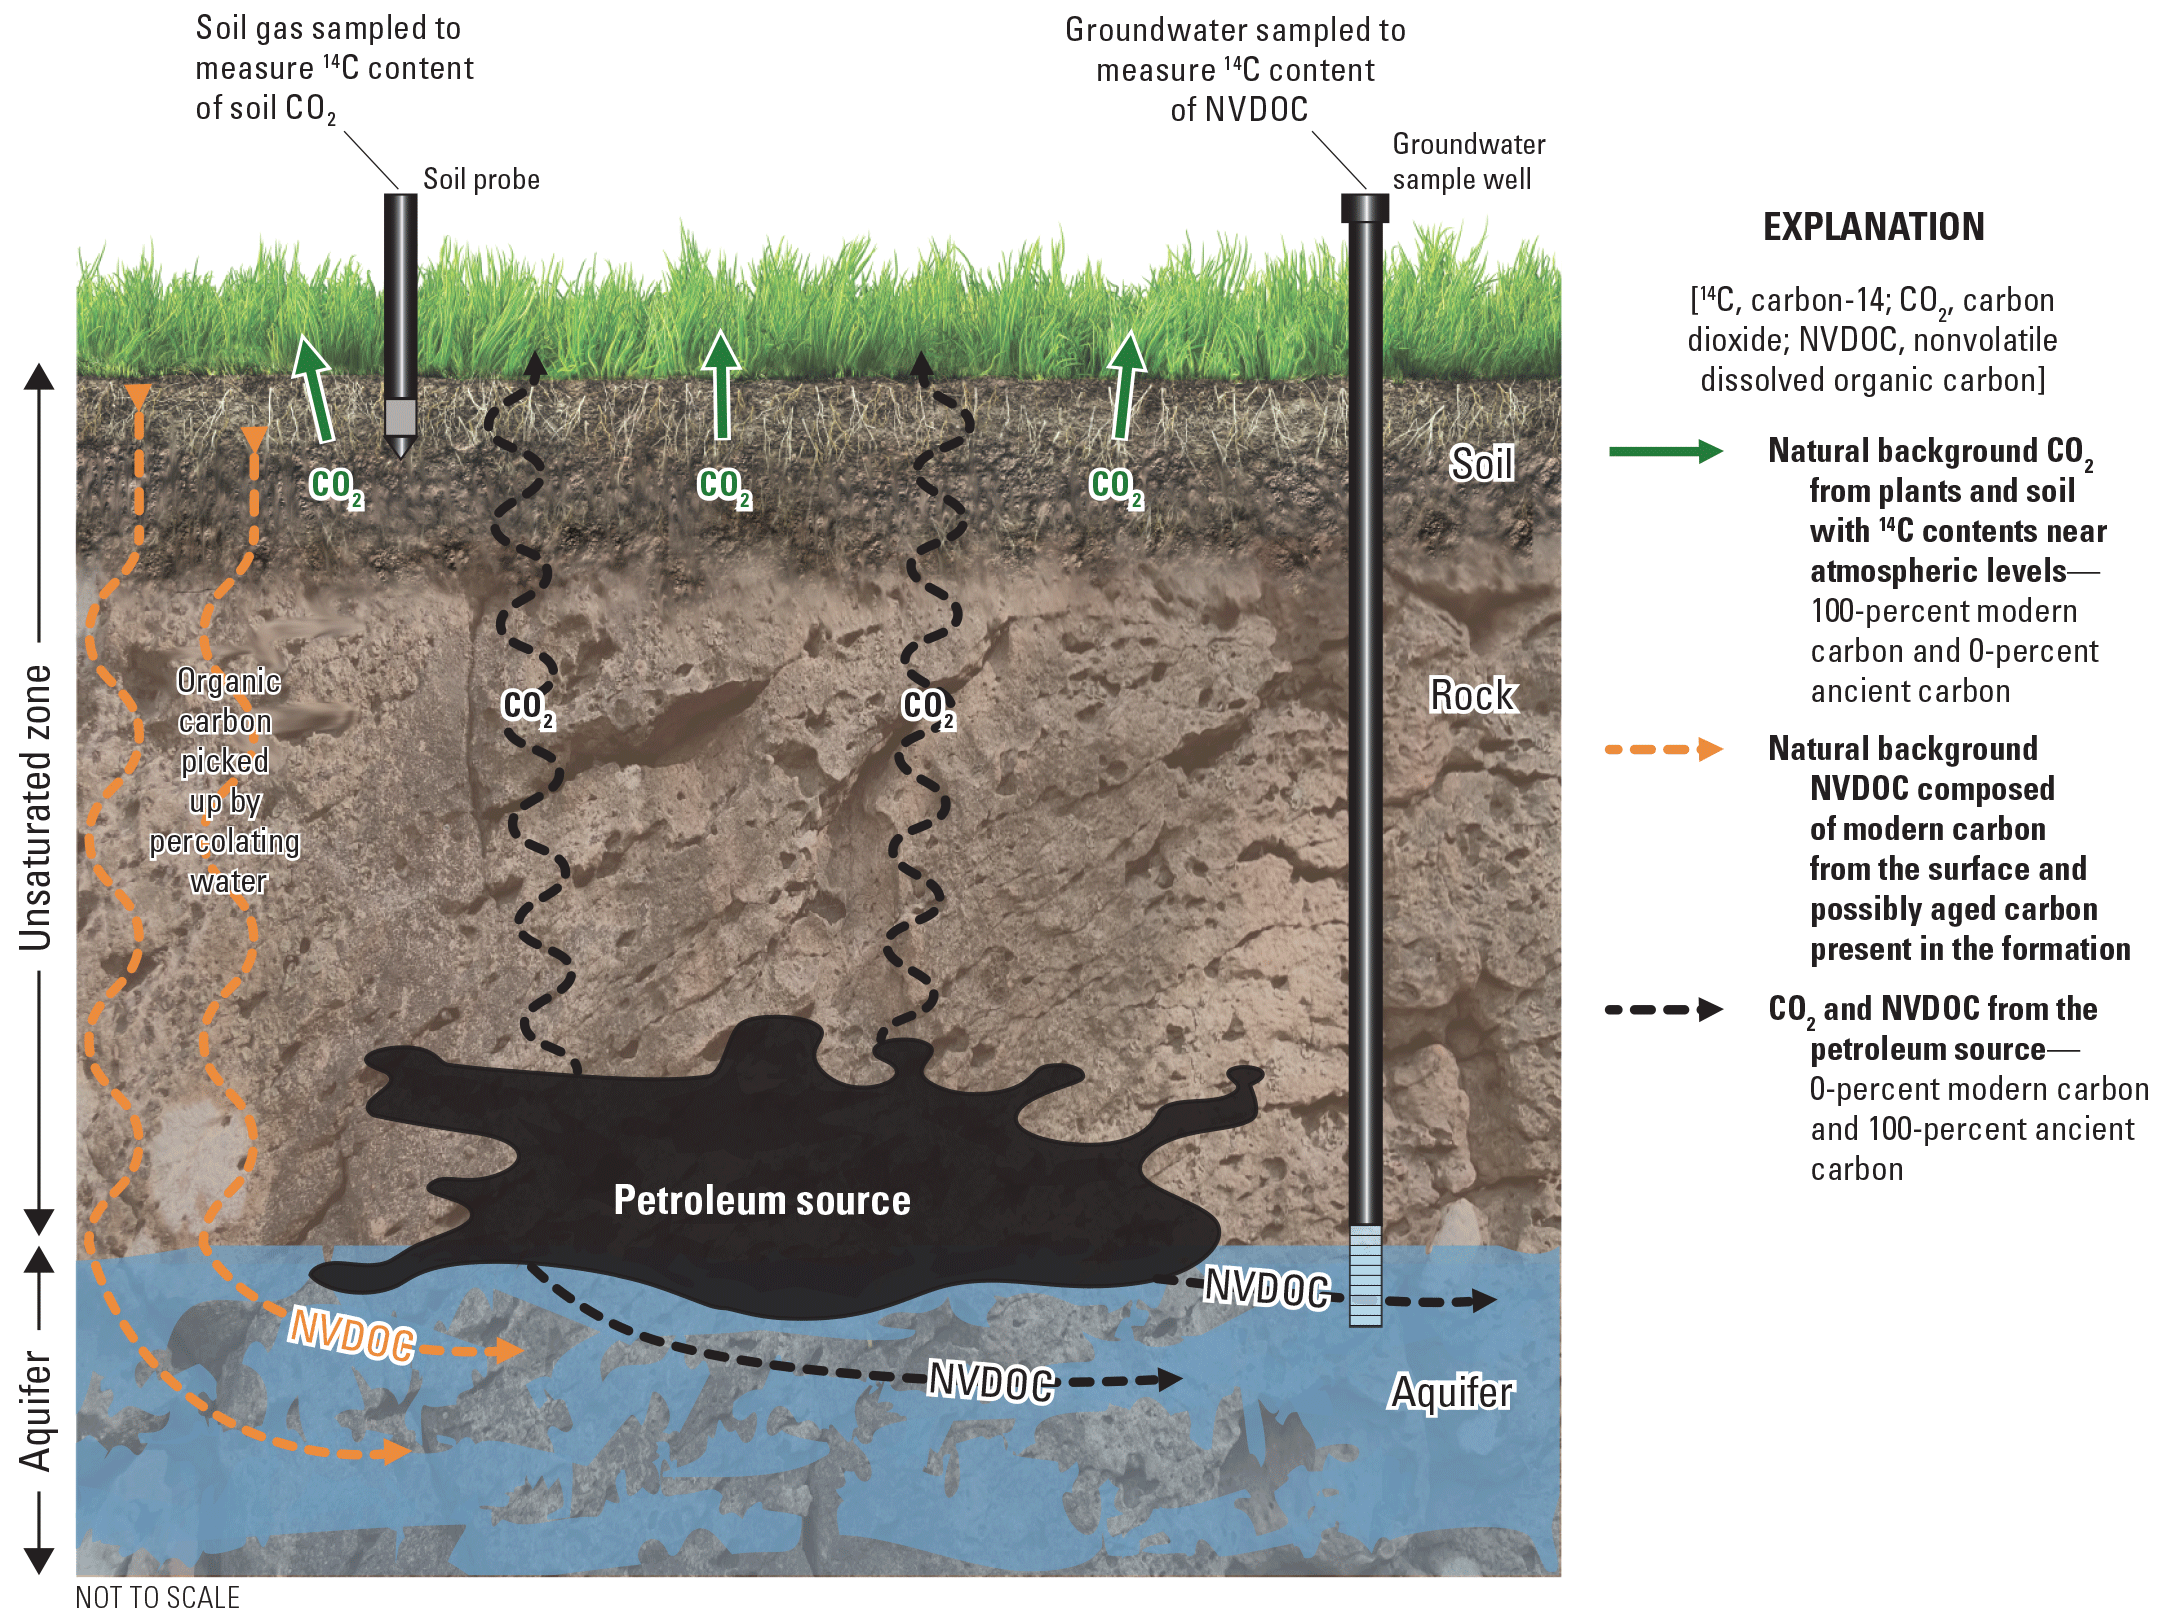 The groundwater sample well goes through the unsaturated zone and into the aquifer
                        where nonvolatile dissolved organic carbon concentrations increase from the addition
                        of organic carbon picked up by percolating water moving past a petroleum source. Carbon
                        dioxide formed during biodegradation moves from the unsaturated zone down into the
                        aquifer and up to the ground where it is released.